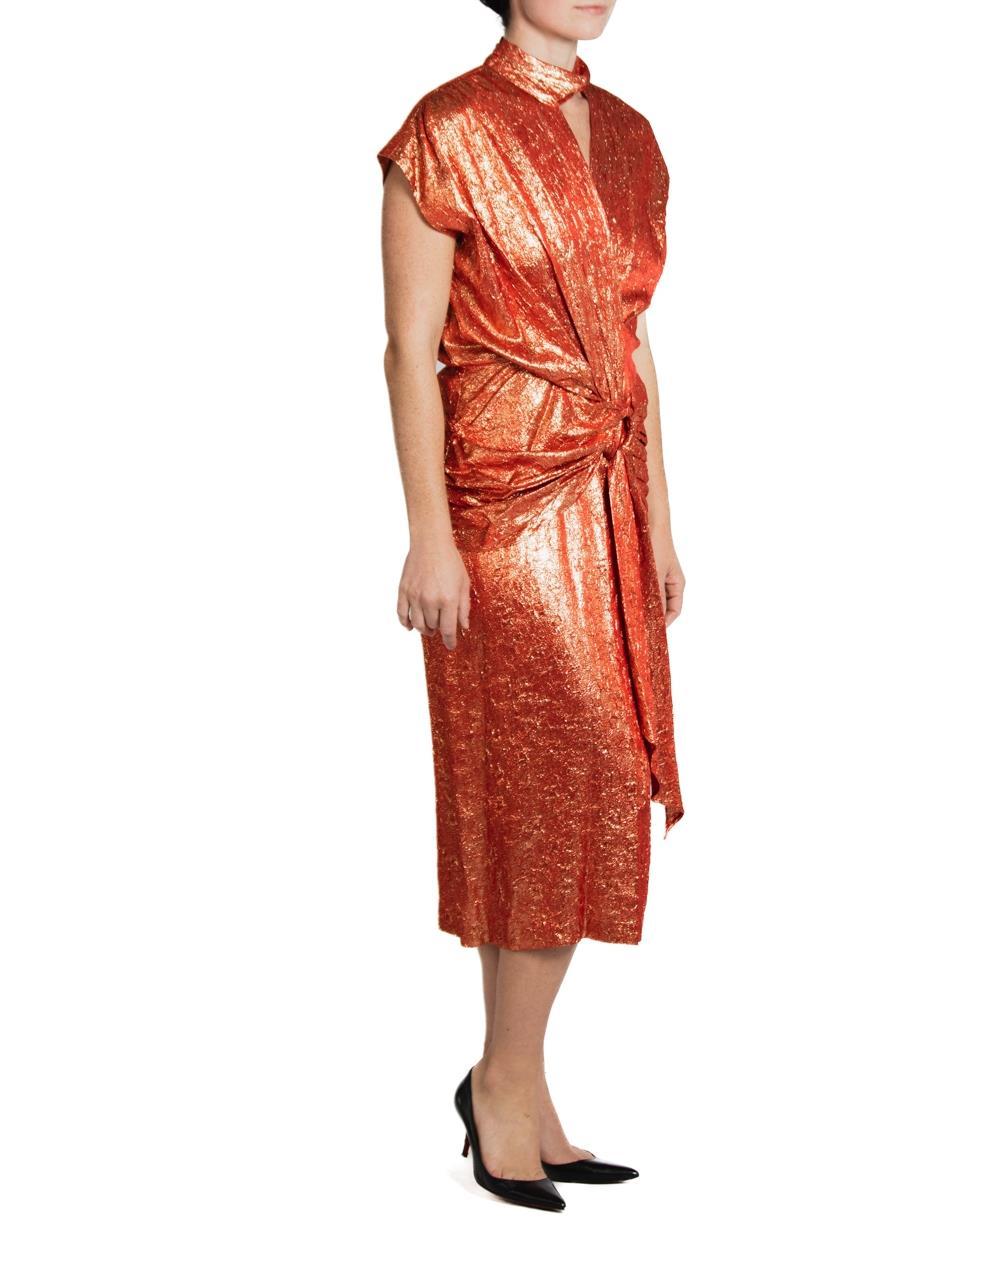 Women's 1980S Red & Gold Rayon/Lurex Jacquard Dress For Sale